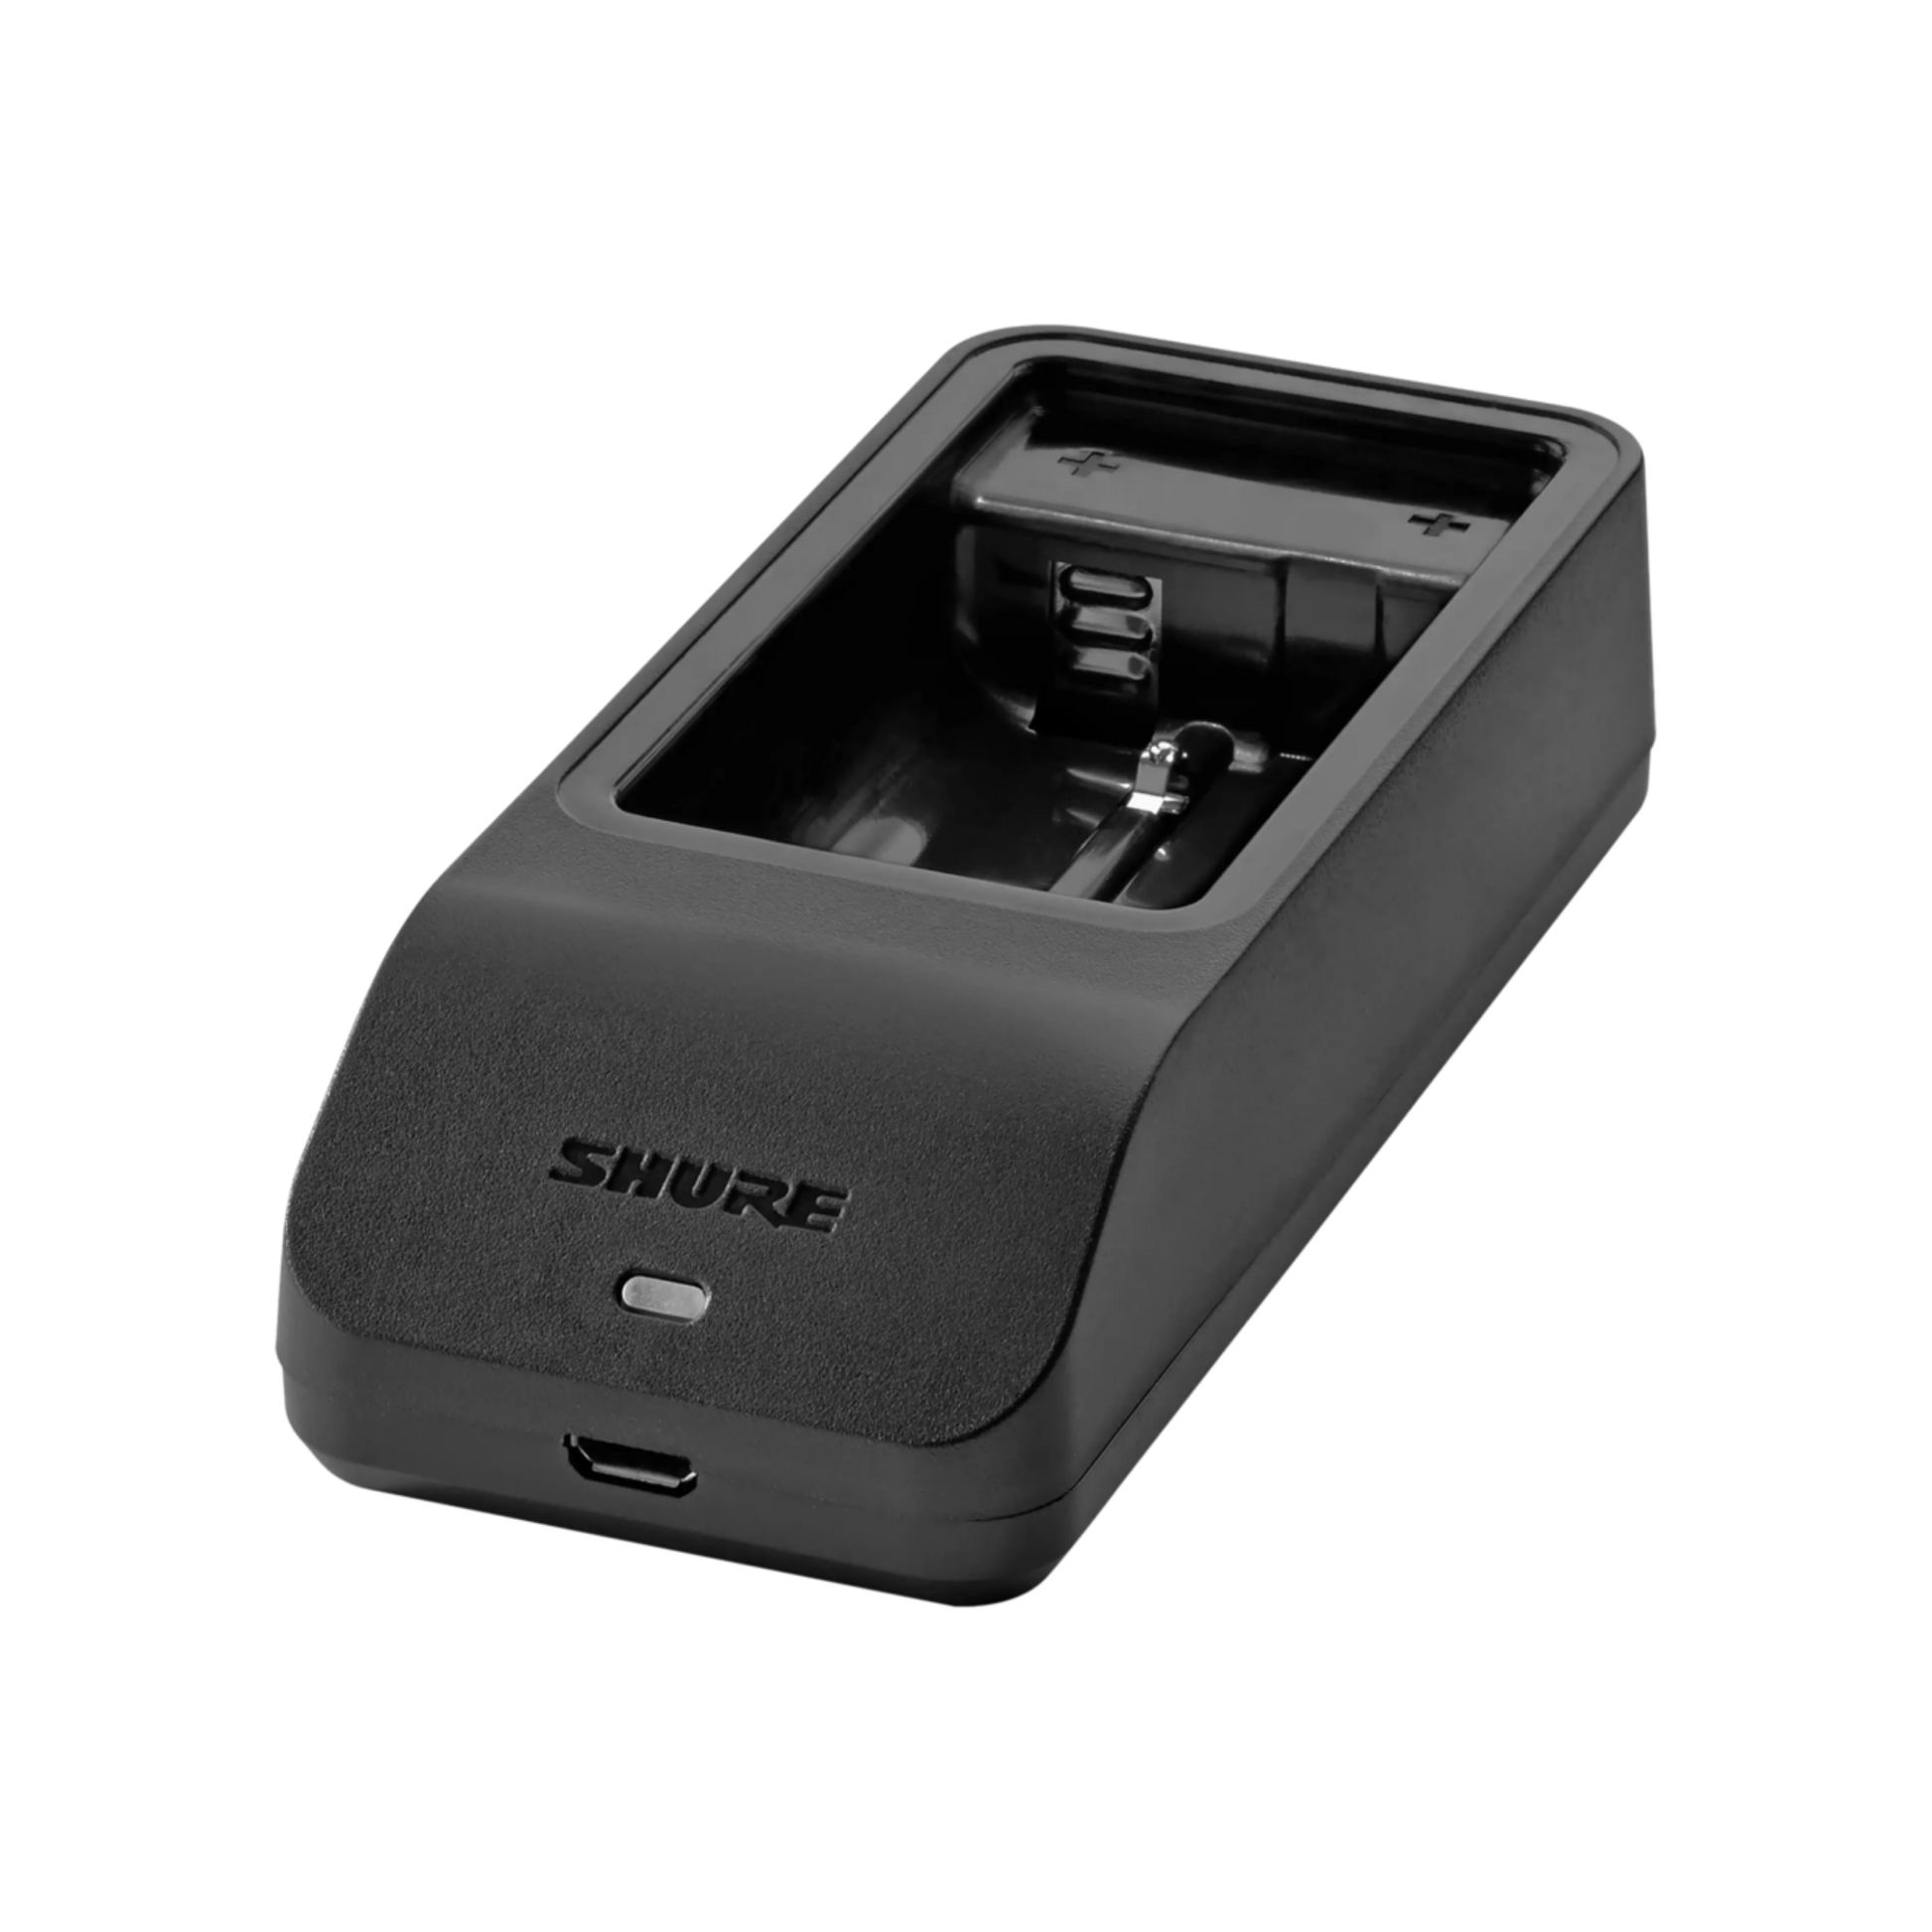 Shure SB100 battery charger